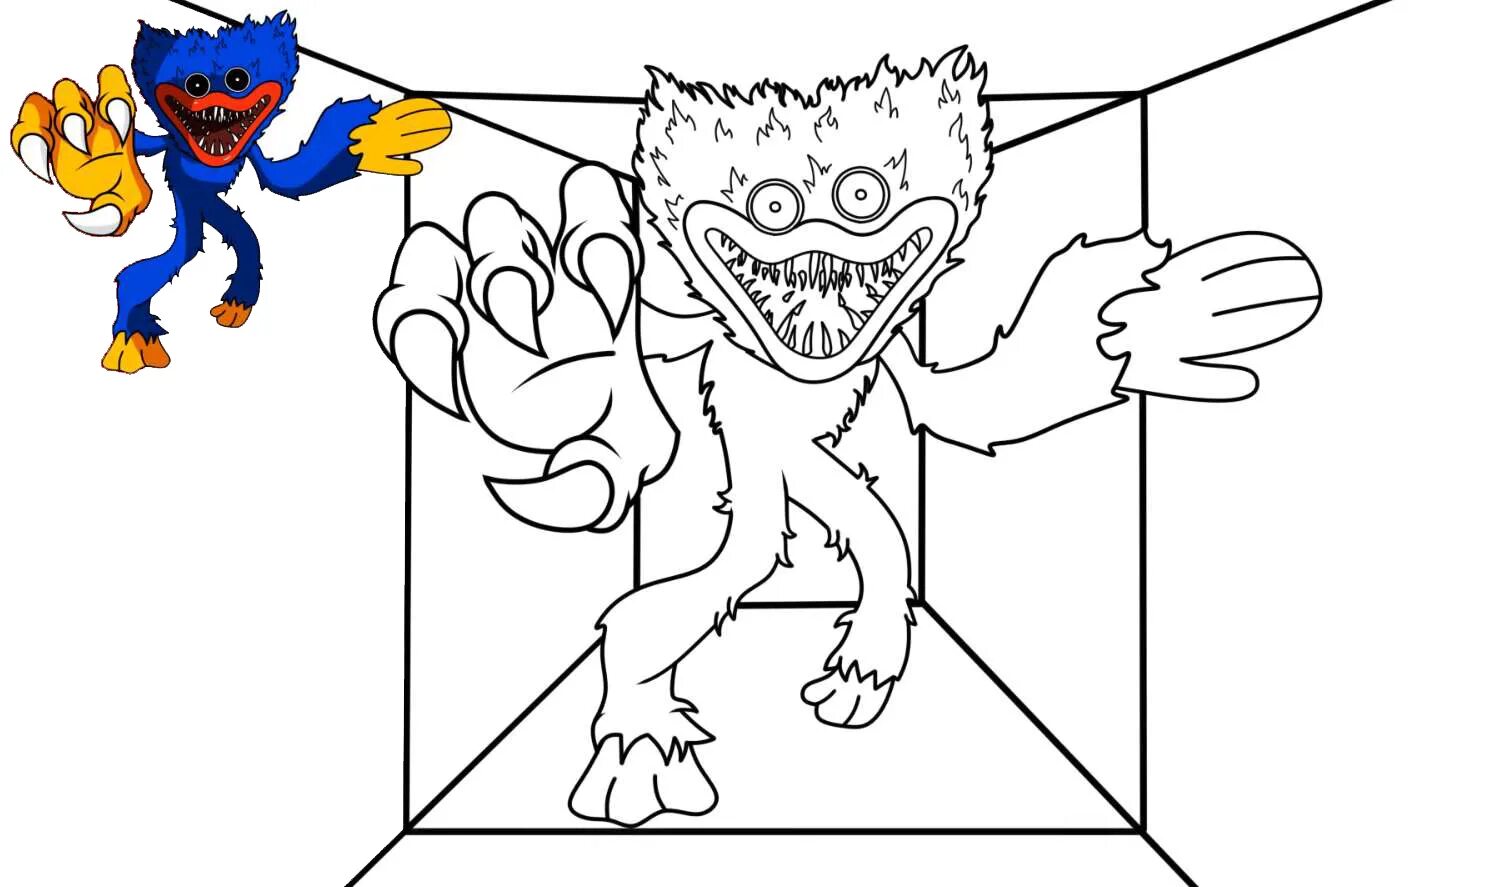 Splendorous hag waghy coloring page